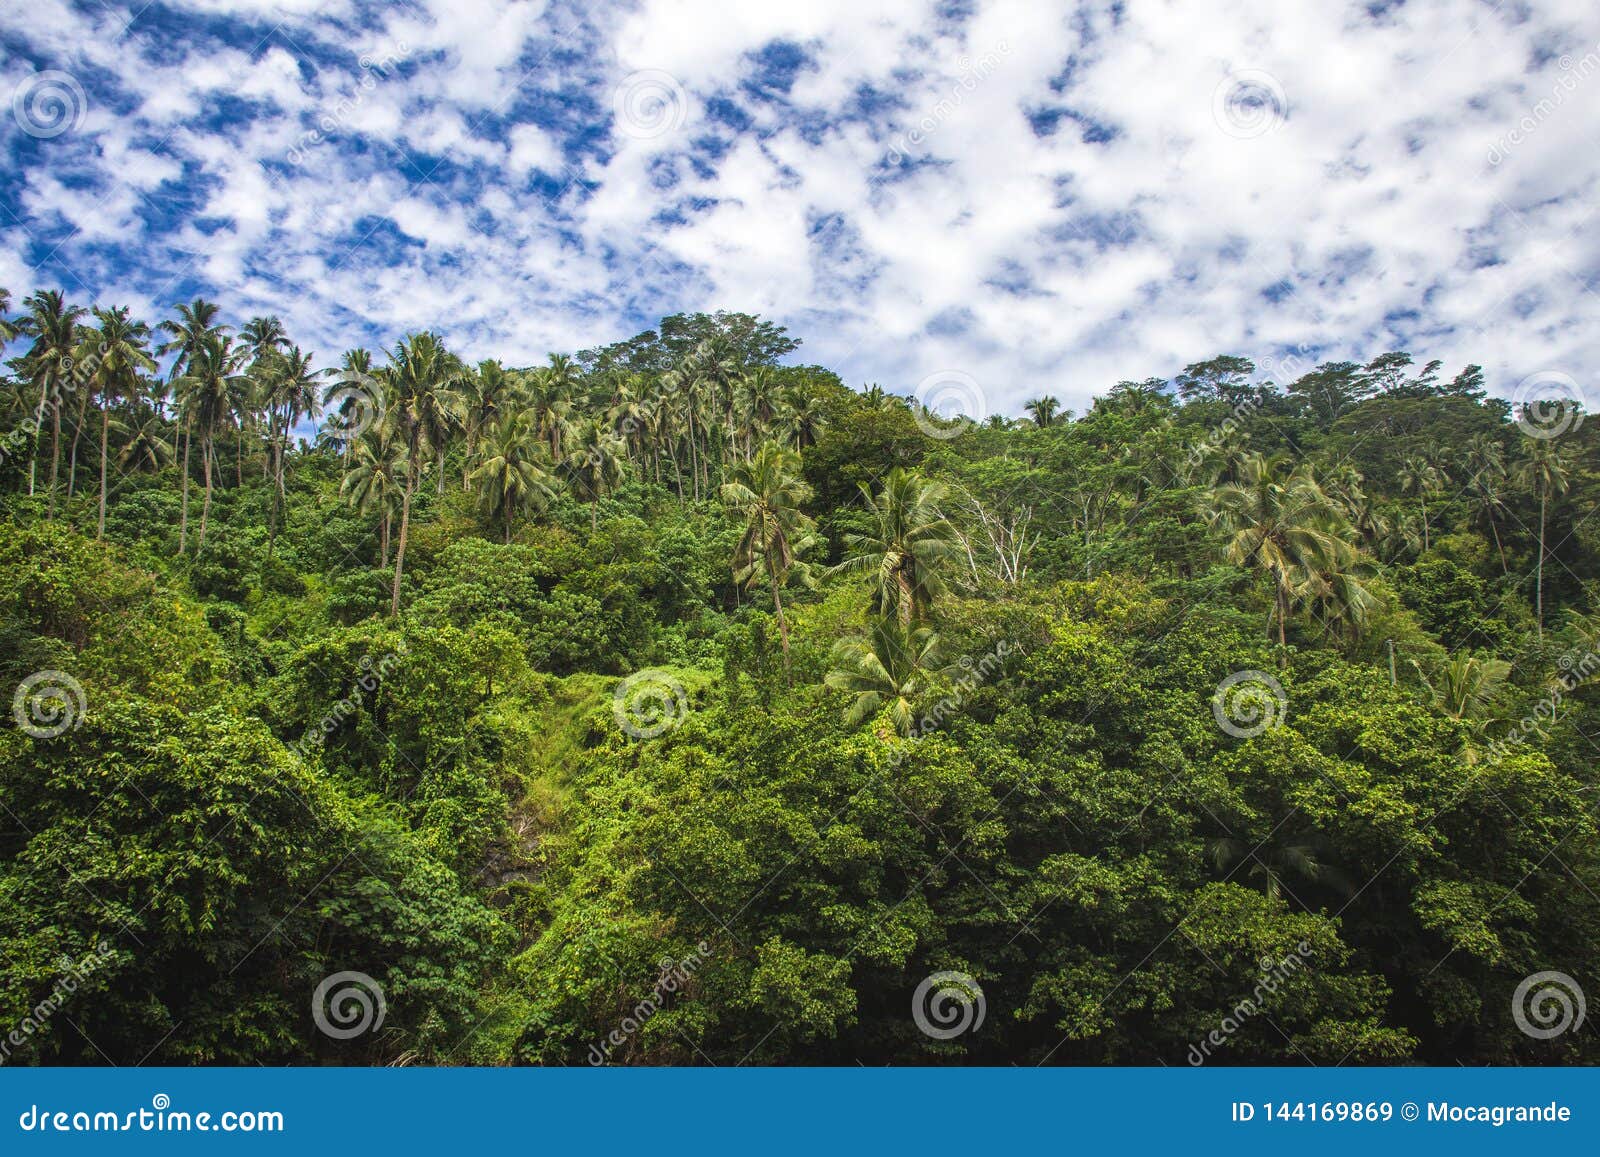 a stunning areal view with palms in tropical samoa, upolu, pacific